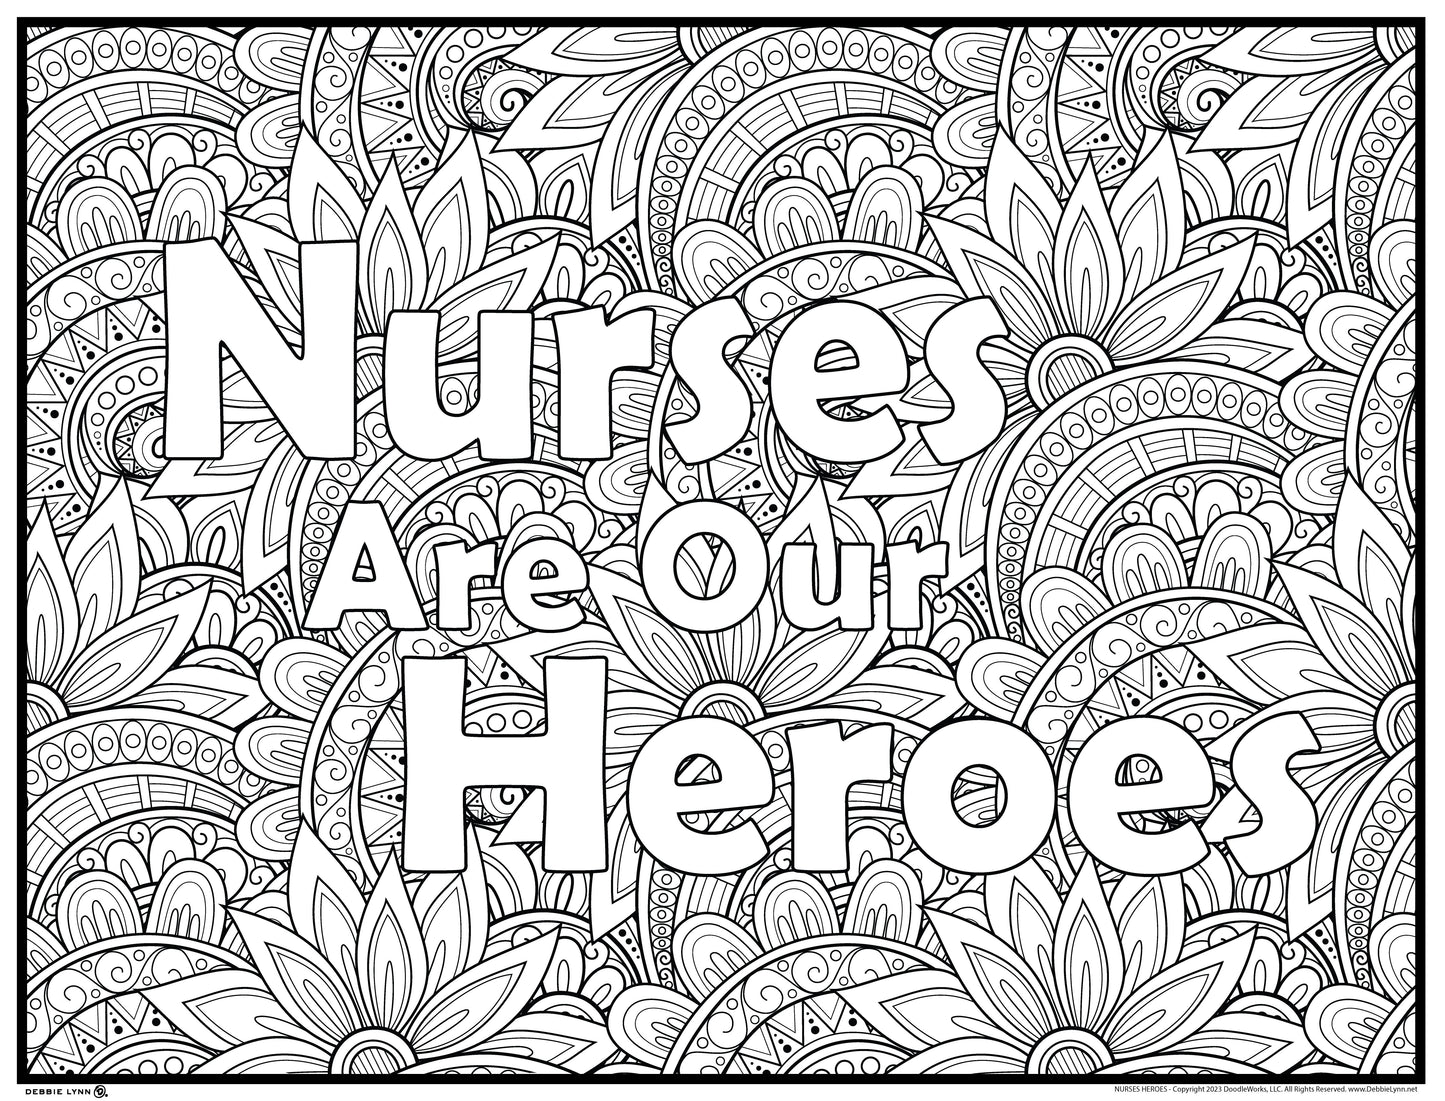 Nurses Are Our Heroes Personalized Giant Coloring Poster 46" x 60"